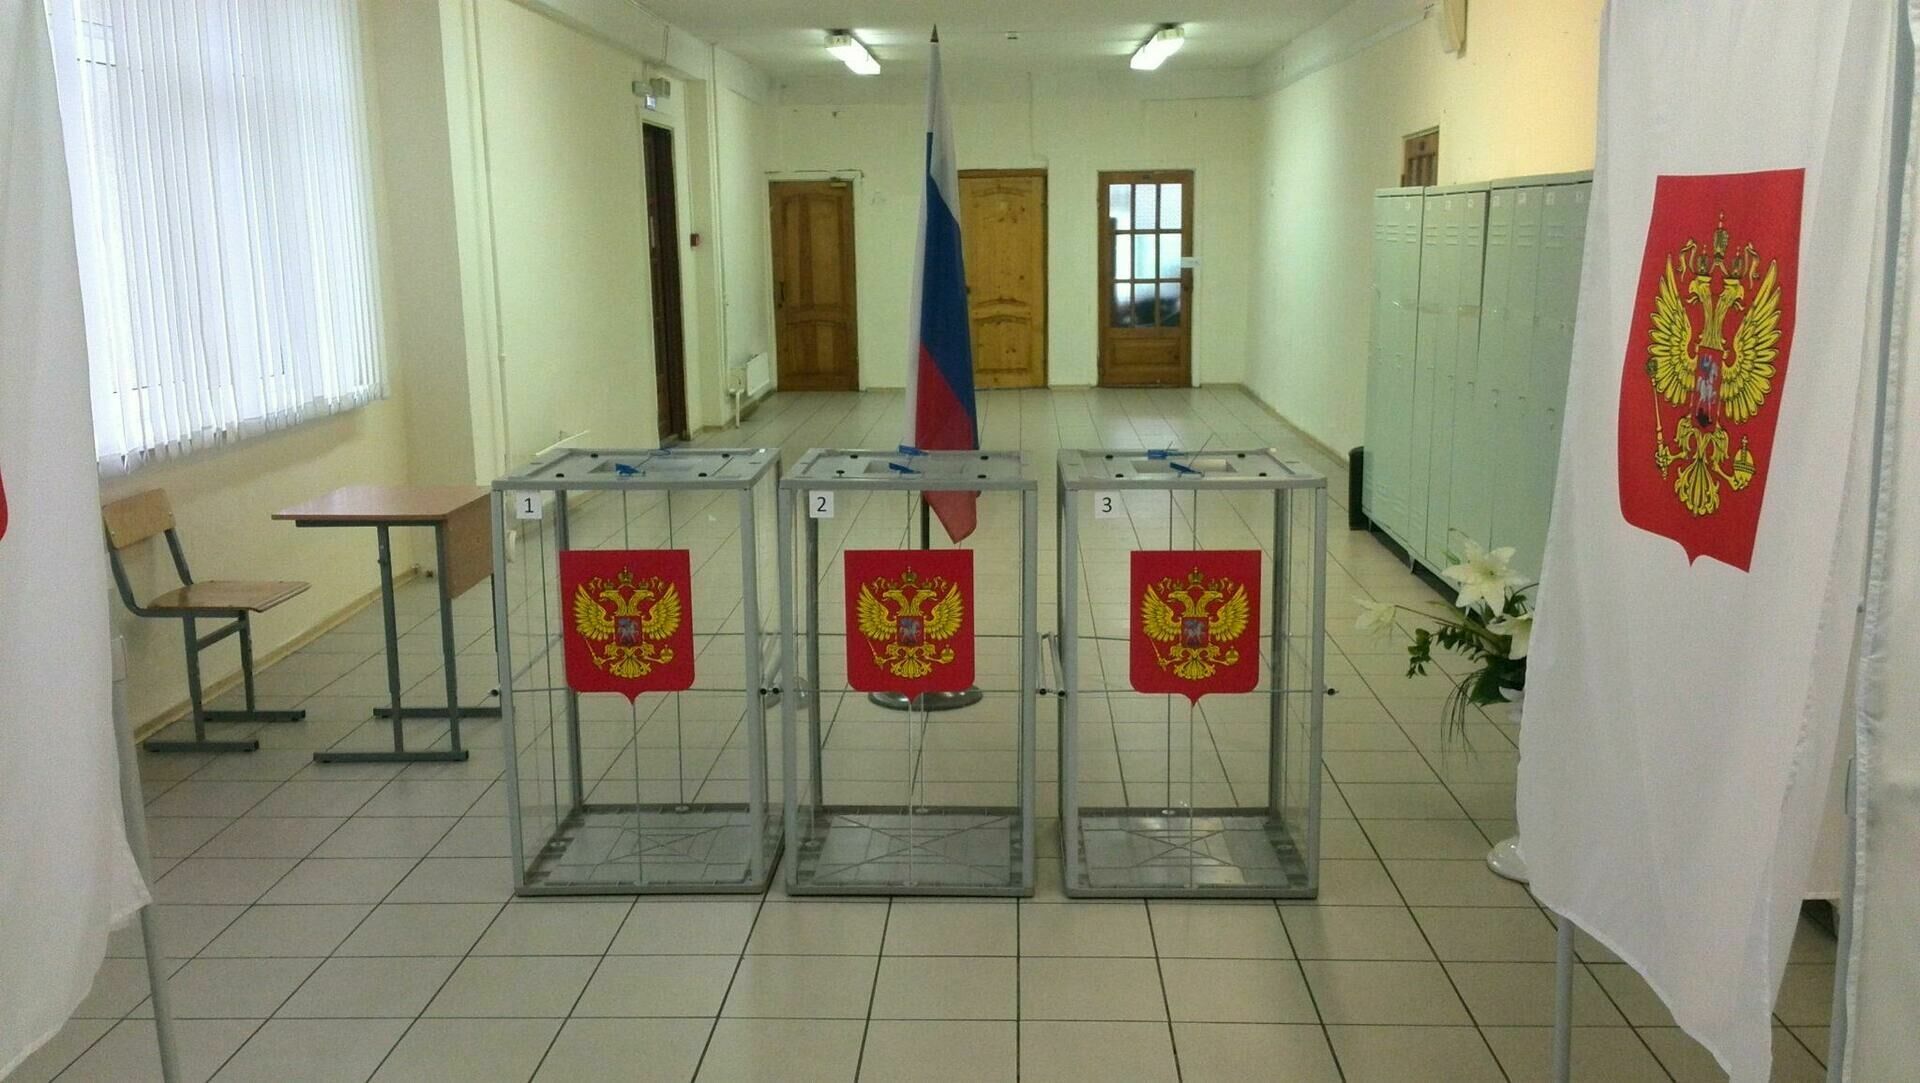 The figure of the day: Only 6.8 percent of citizens can come to the polling stations in Moscow?